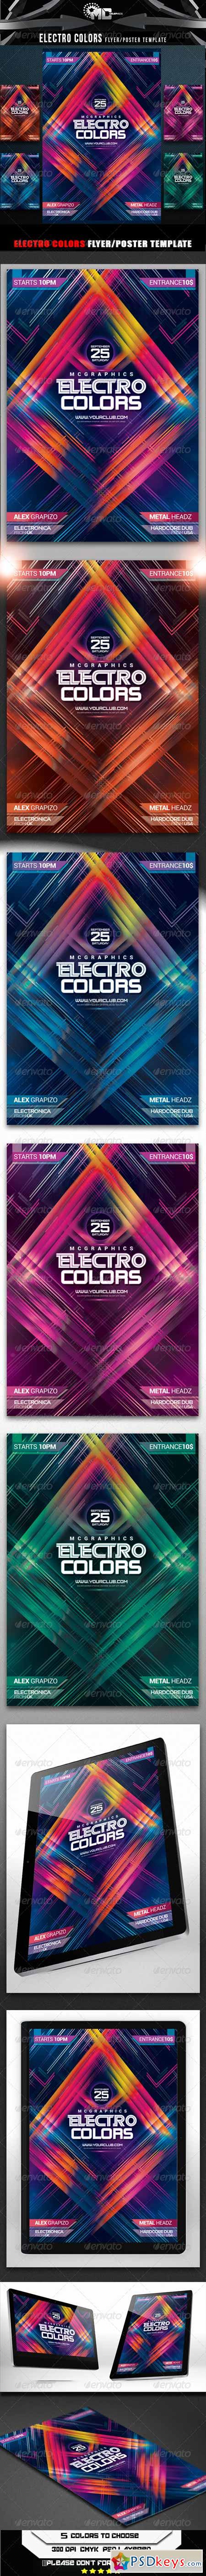 Electro Colors Flyer Poster Template 8545314